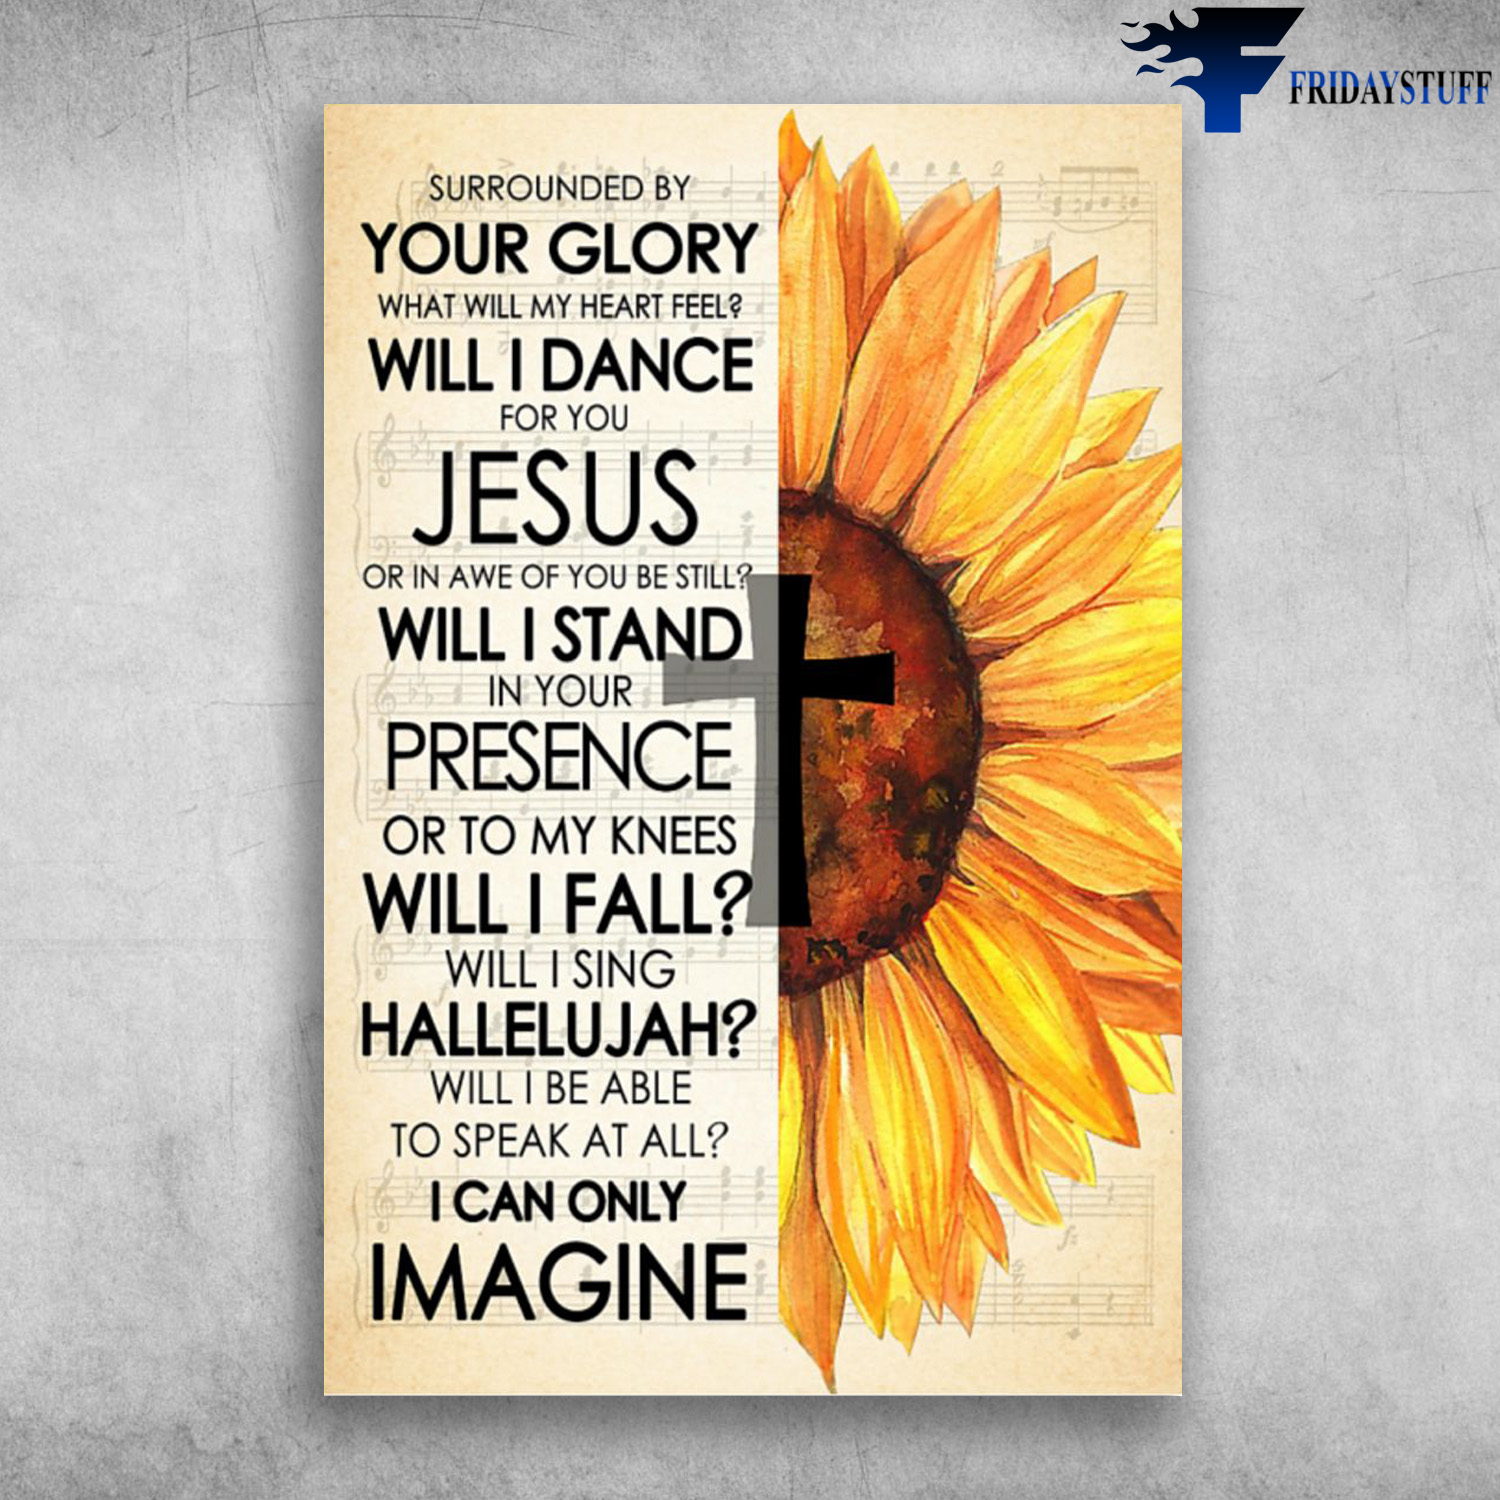 Sunflower Cross - Surrounded By Your Glory, What Will My Heart Feel, Will I Dance For You Jesus, Or In Awe Of You Be Still, Will I Stand In Your Presence, Or To My Kness, Will I Sing Hallelujah, Will I Be Able To Speak At All, I Can Only Imagine